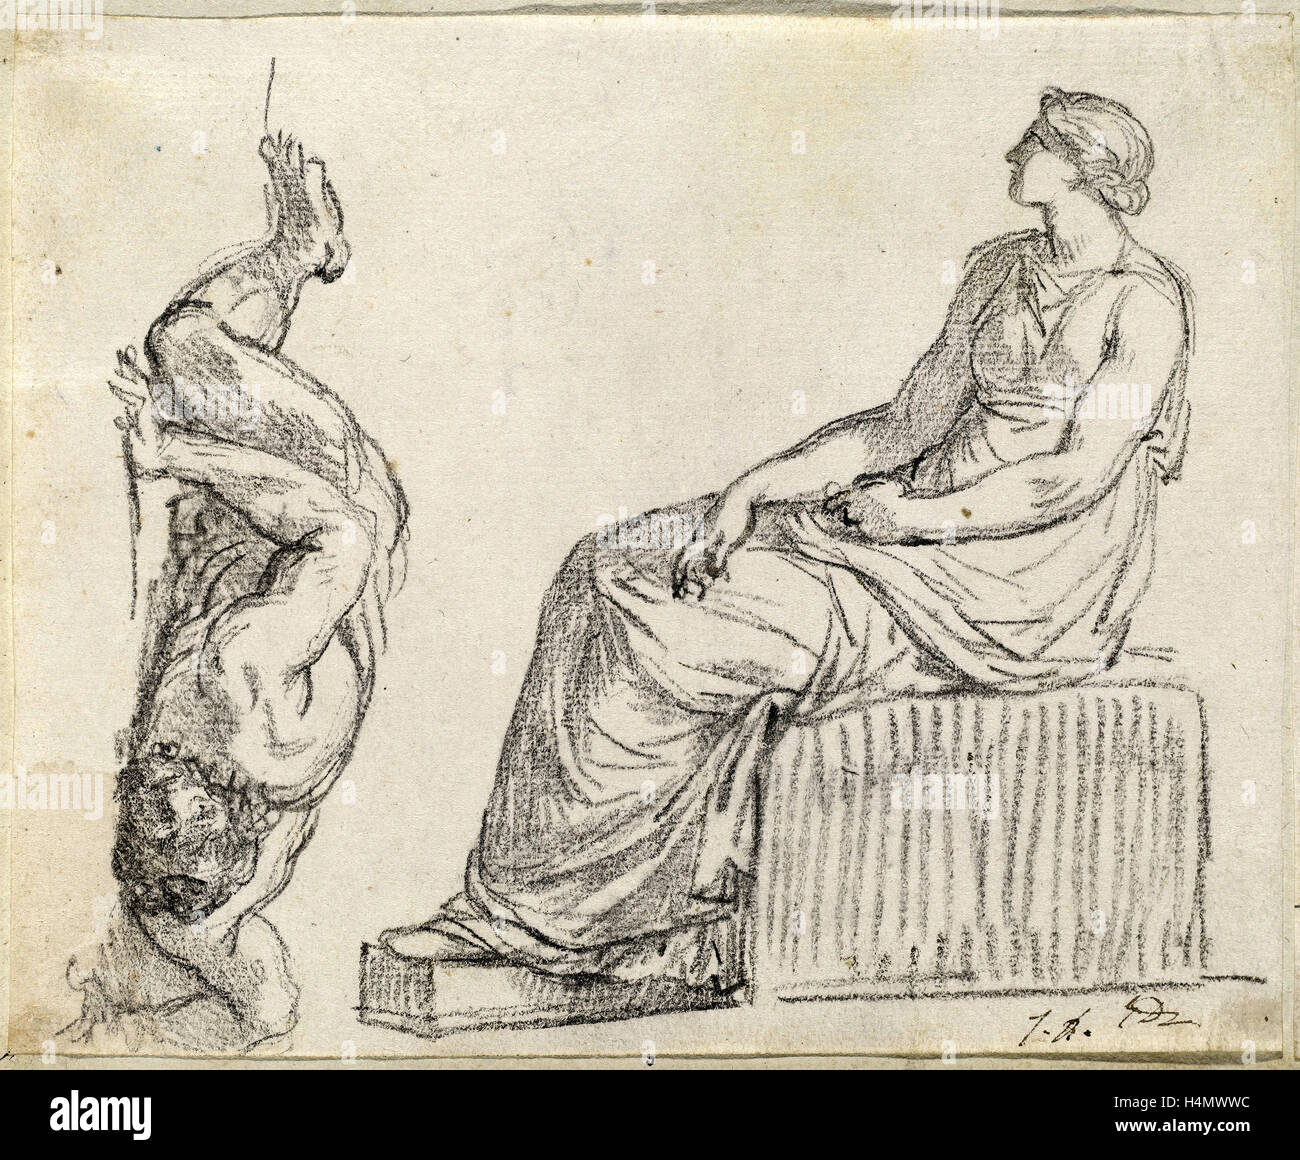 Jacques-Louis David, Seated Woman and Man Sprawling on the Ground, French, 1748 - 1825, 1775-80, black chalk on laid paper Stock Photo